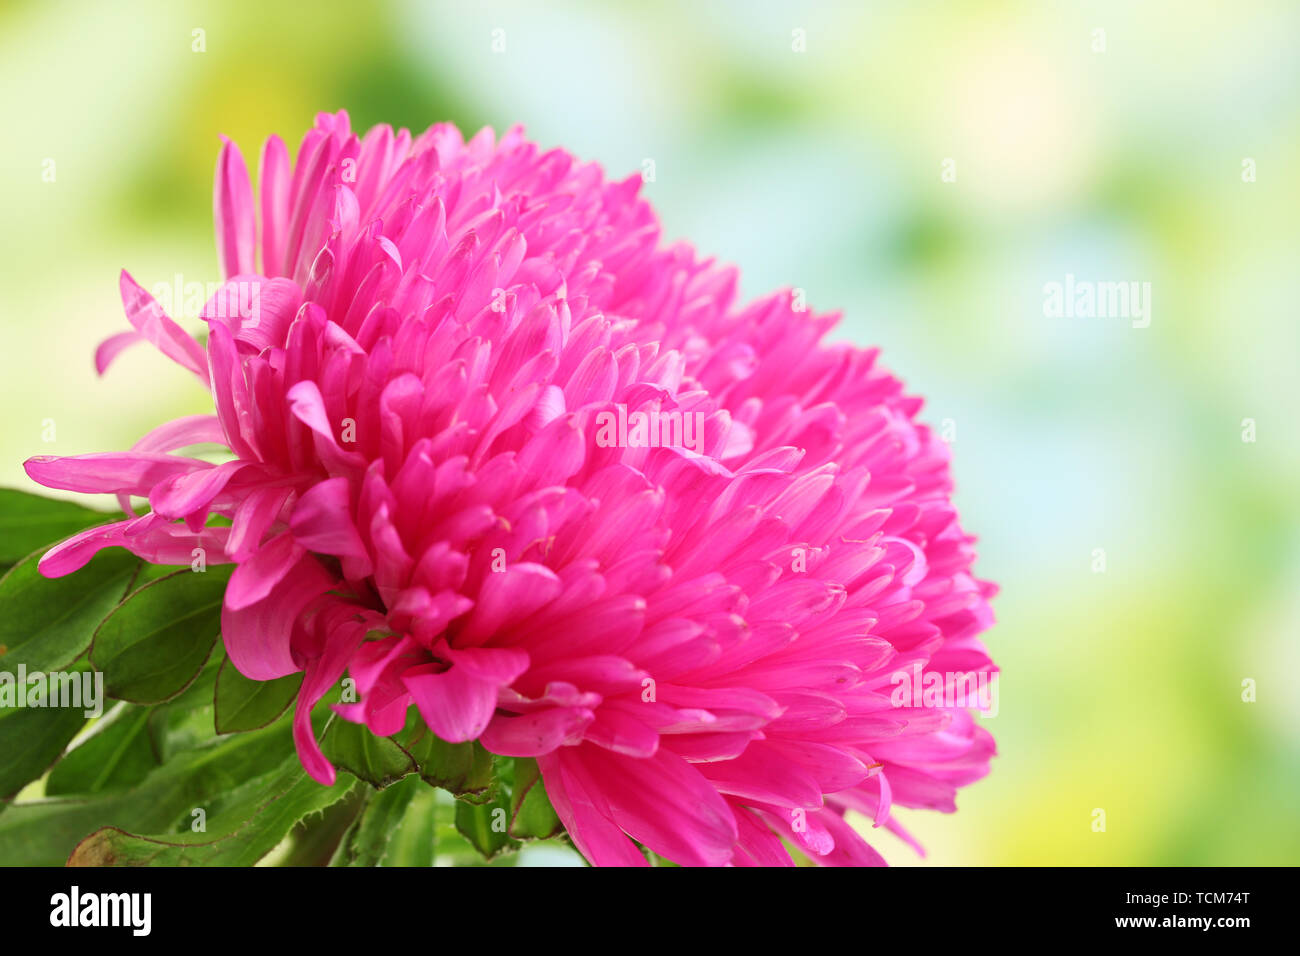 beautiful aster flower, on green background Stock Photo